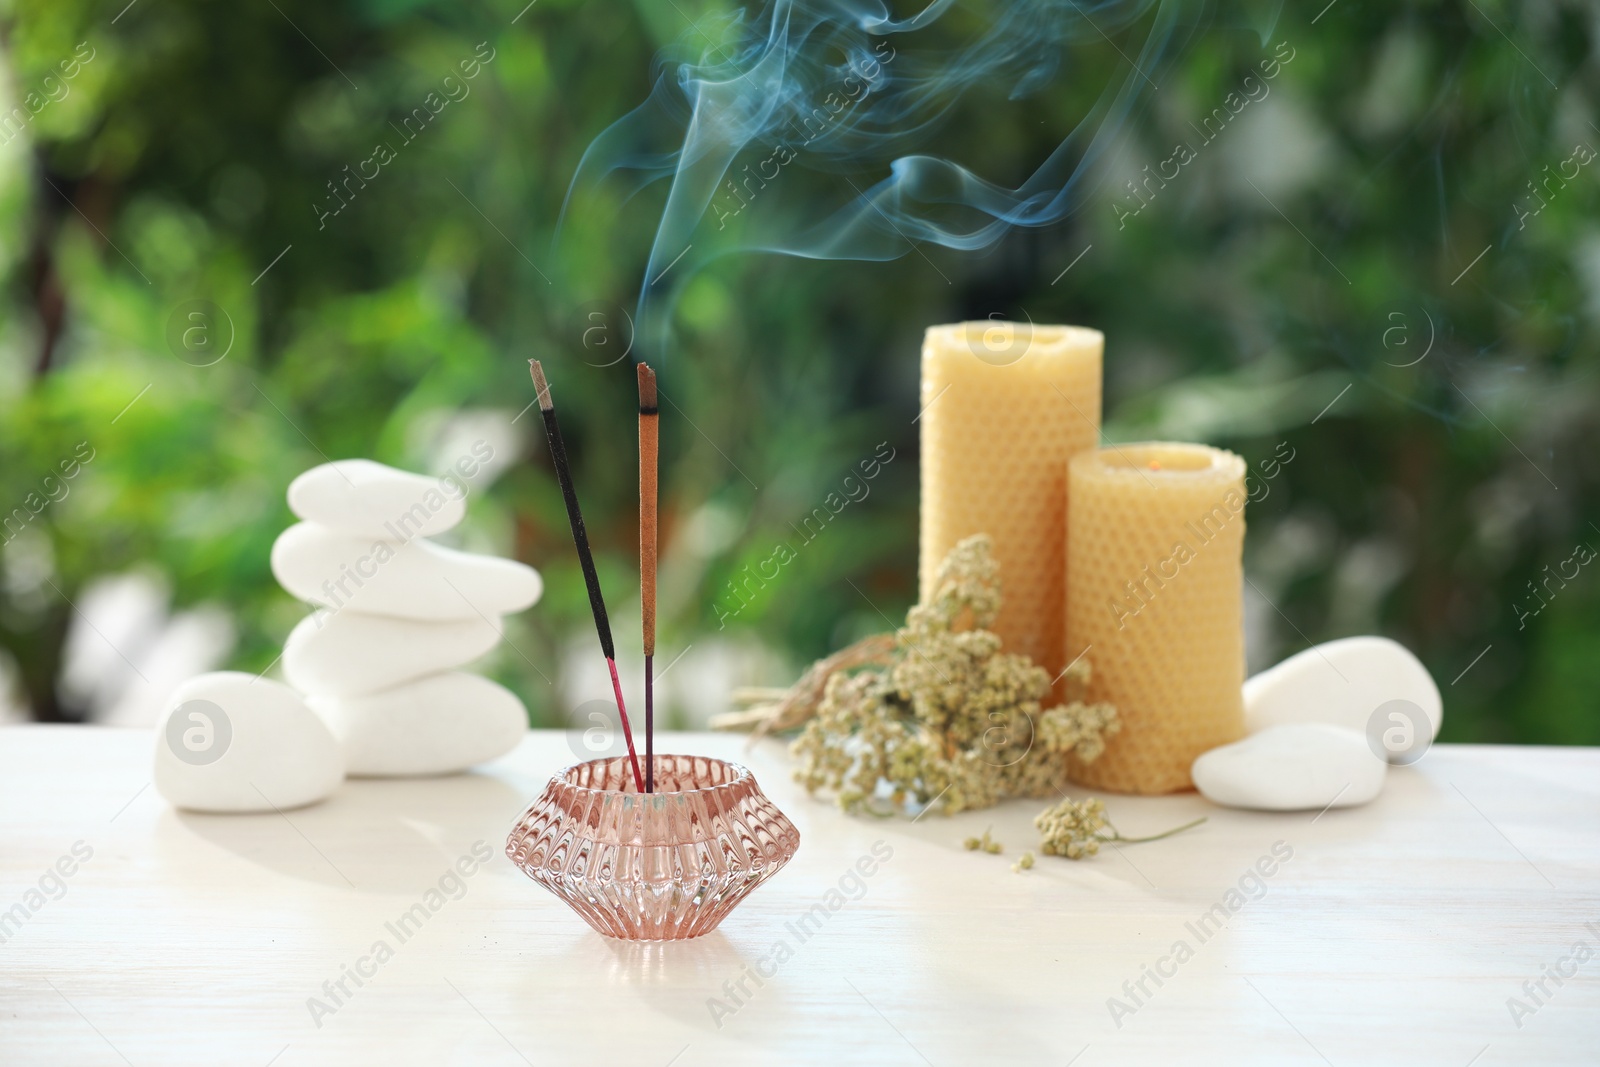 Photo of Incense sticks smoldering in holder near stones, candles and dry flowers on wooden table outdoors